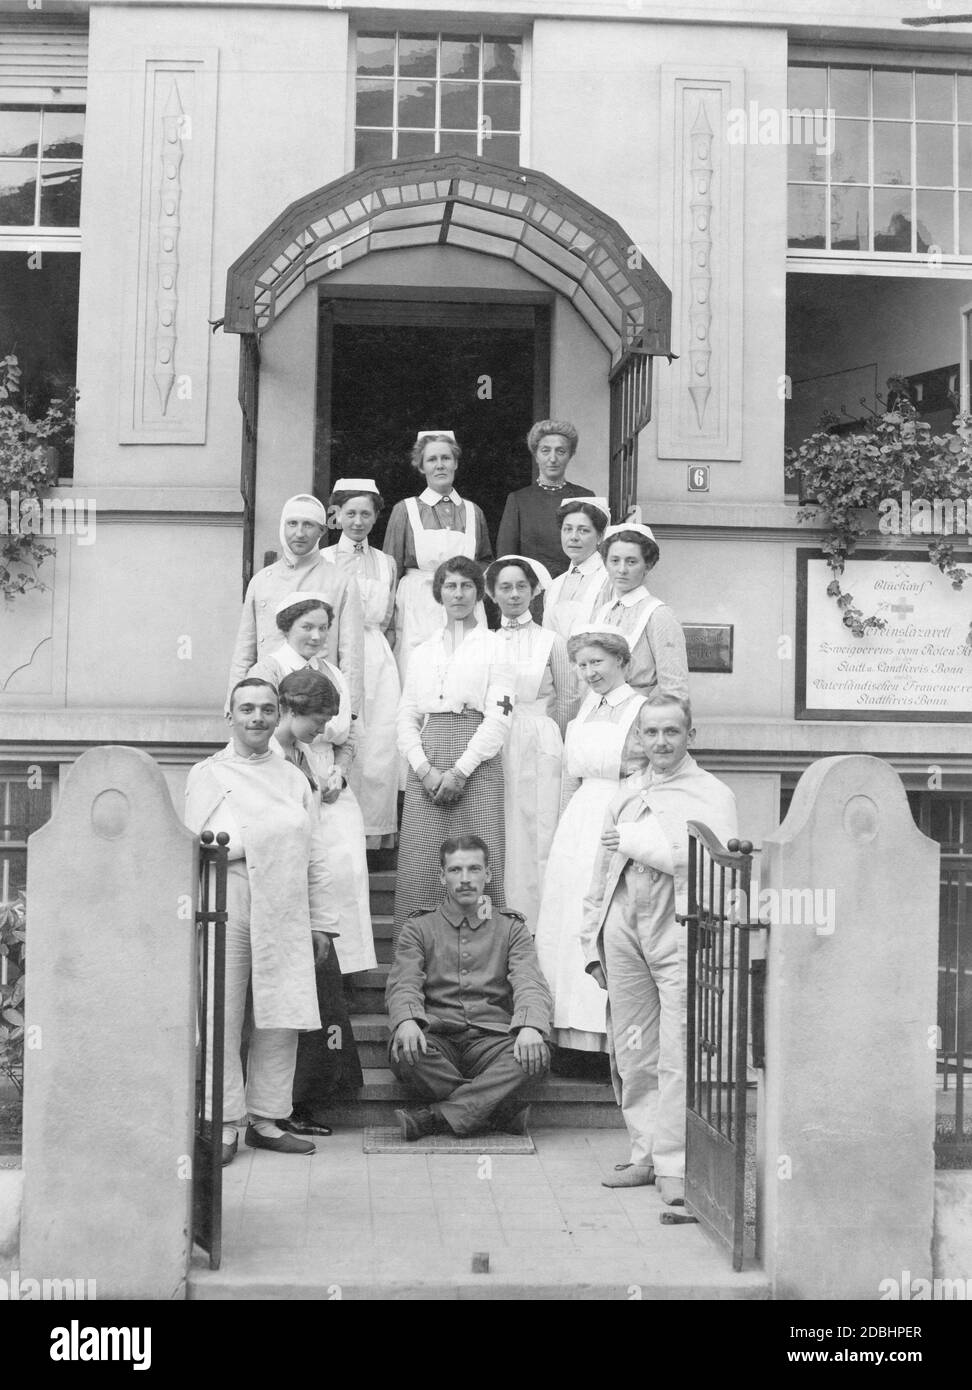 'Princess Viktoria of Schaumburg-Lippe (born of Prussia, centre of the picture with the Red Cross armband) stands with wounded and nurses in front of the entrance to the ''Glueckauf'' military hospital. The sign next to the entrance reads: ''Glueckauf. Association Hospital of the Branch Association of the Red Cross for the City and Region of Bonn and of the Patriotic Women's Association of the Region of Bonn''. Viktoria was honorary chair of the women's association and supported the hospital with her donations. The photo was taken in November 1914 after the outbreak of the First World War.' Stock Photo